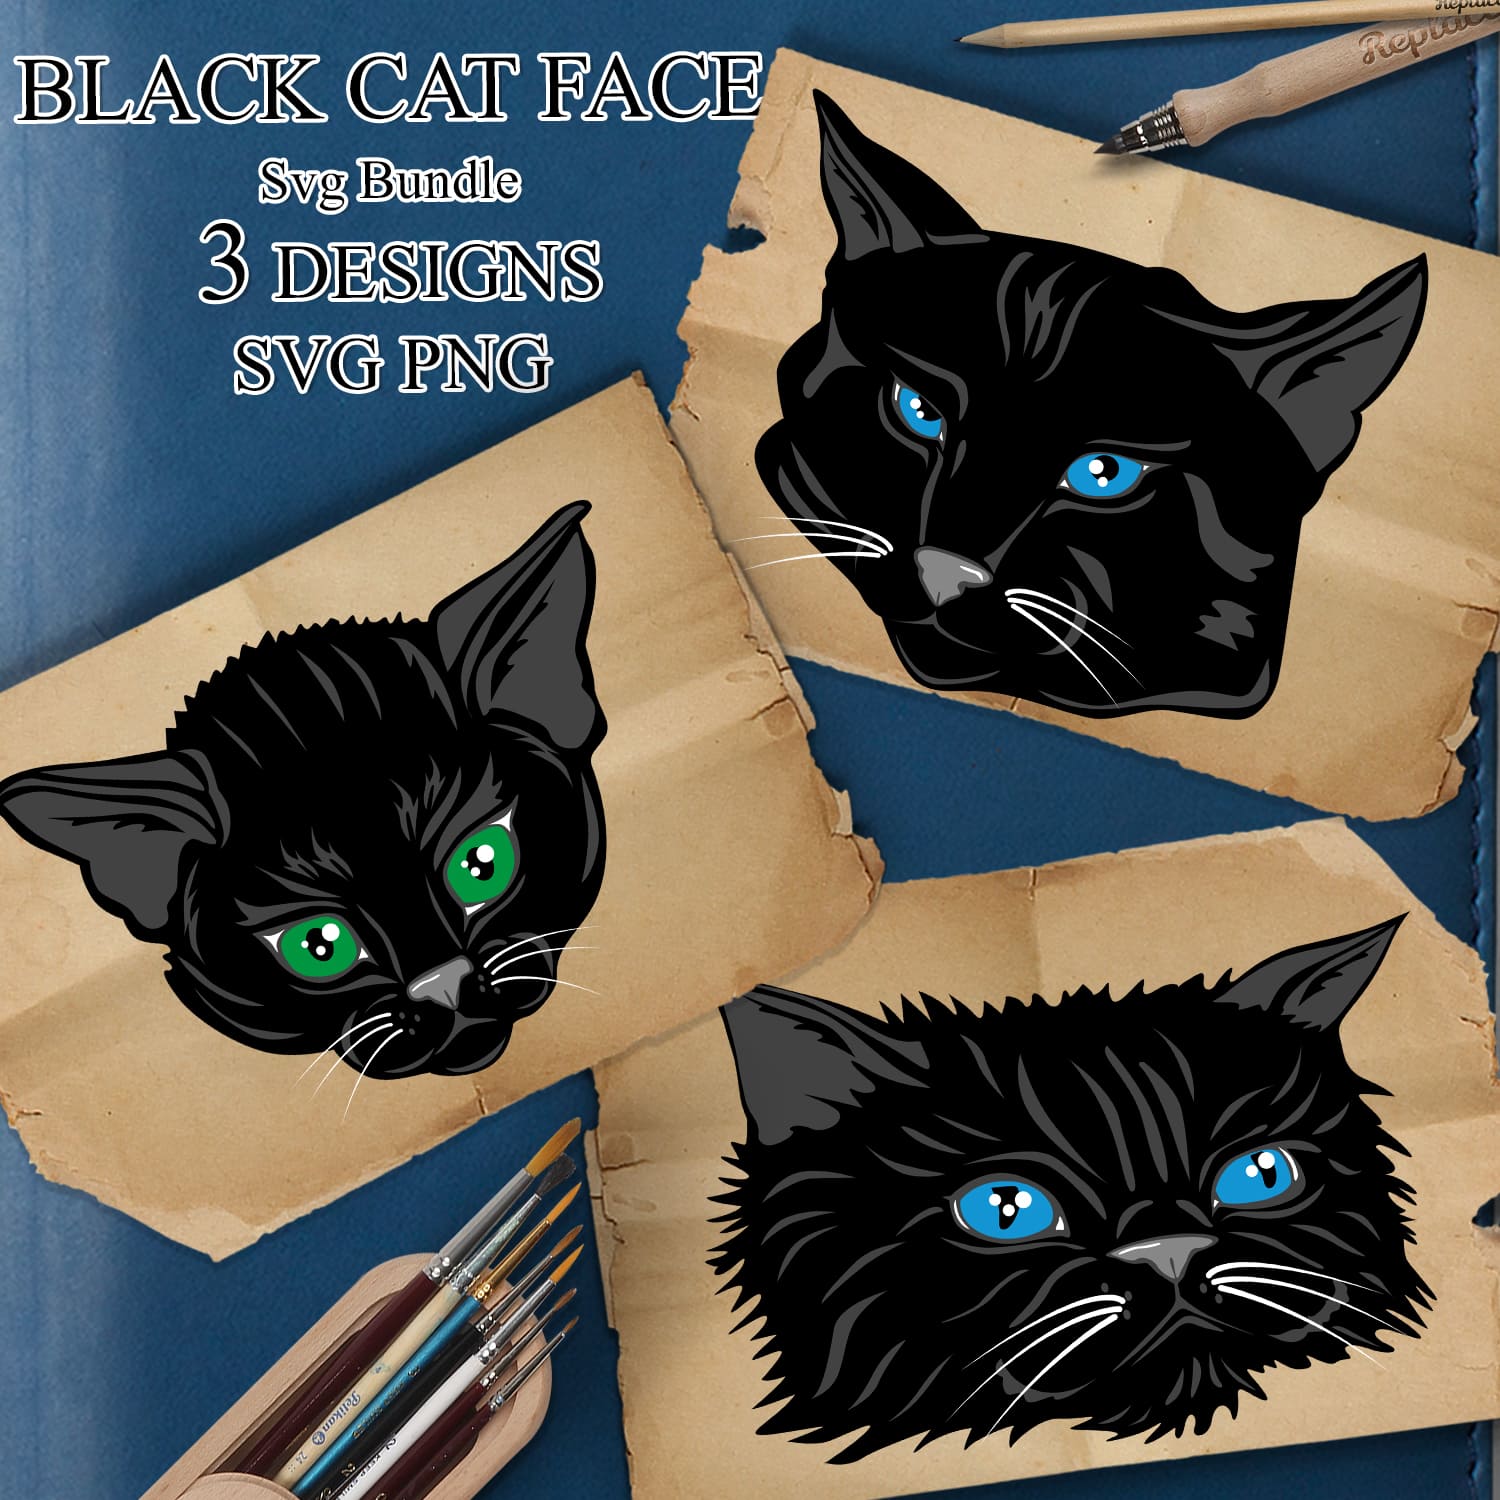 Pair of black cat face stickers on a piece of brown paper.